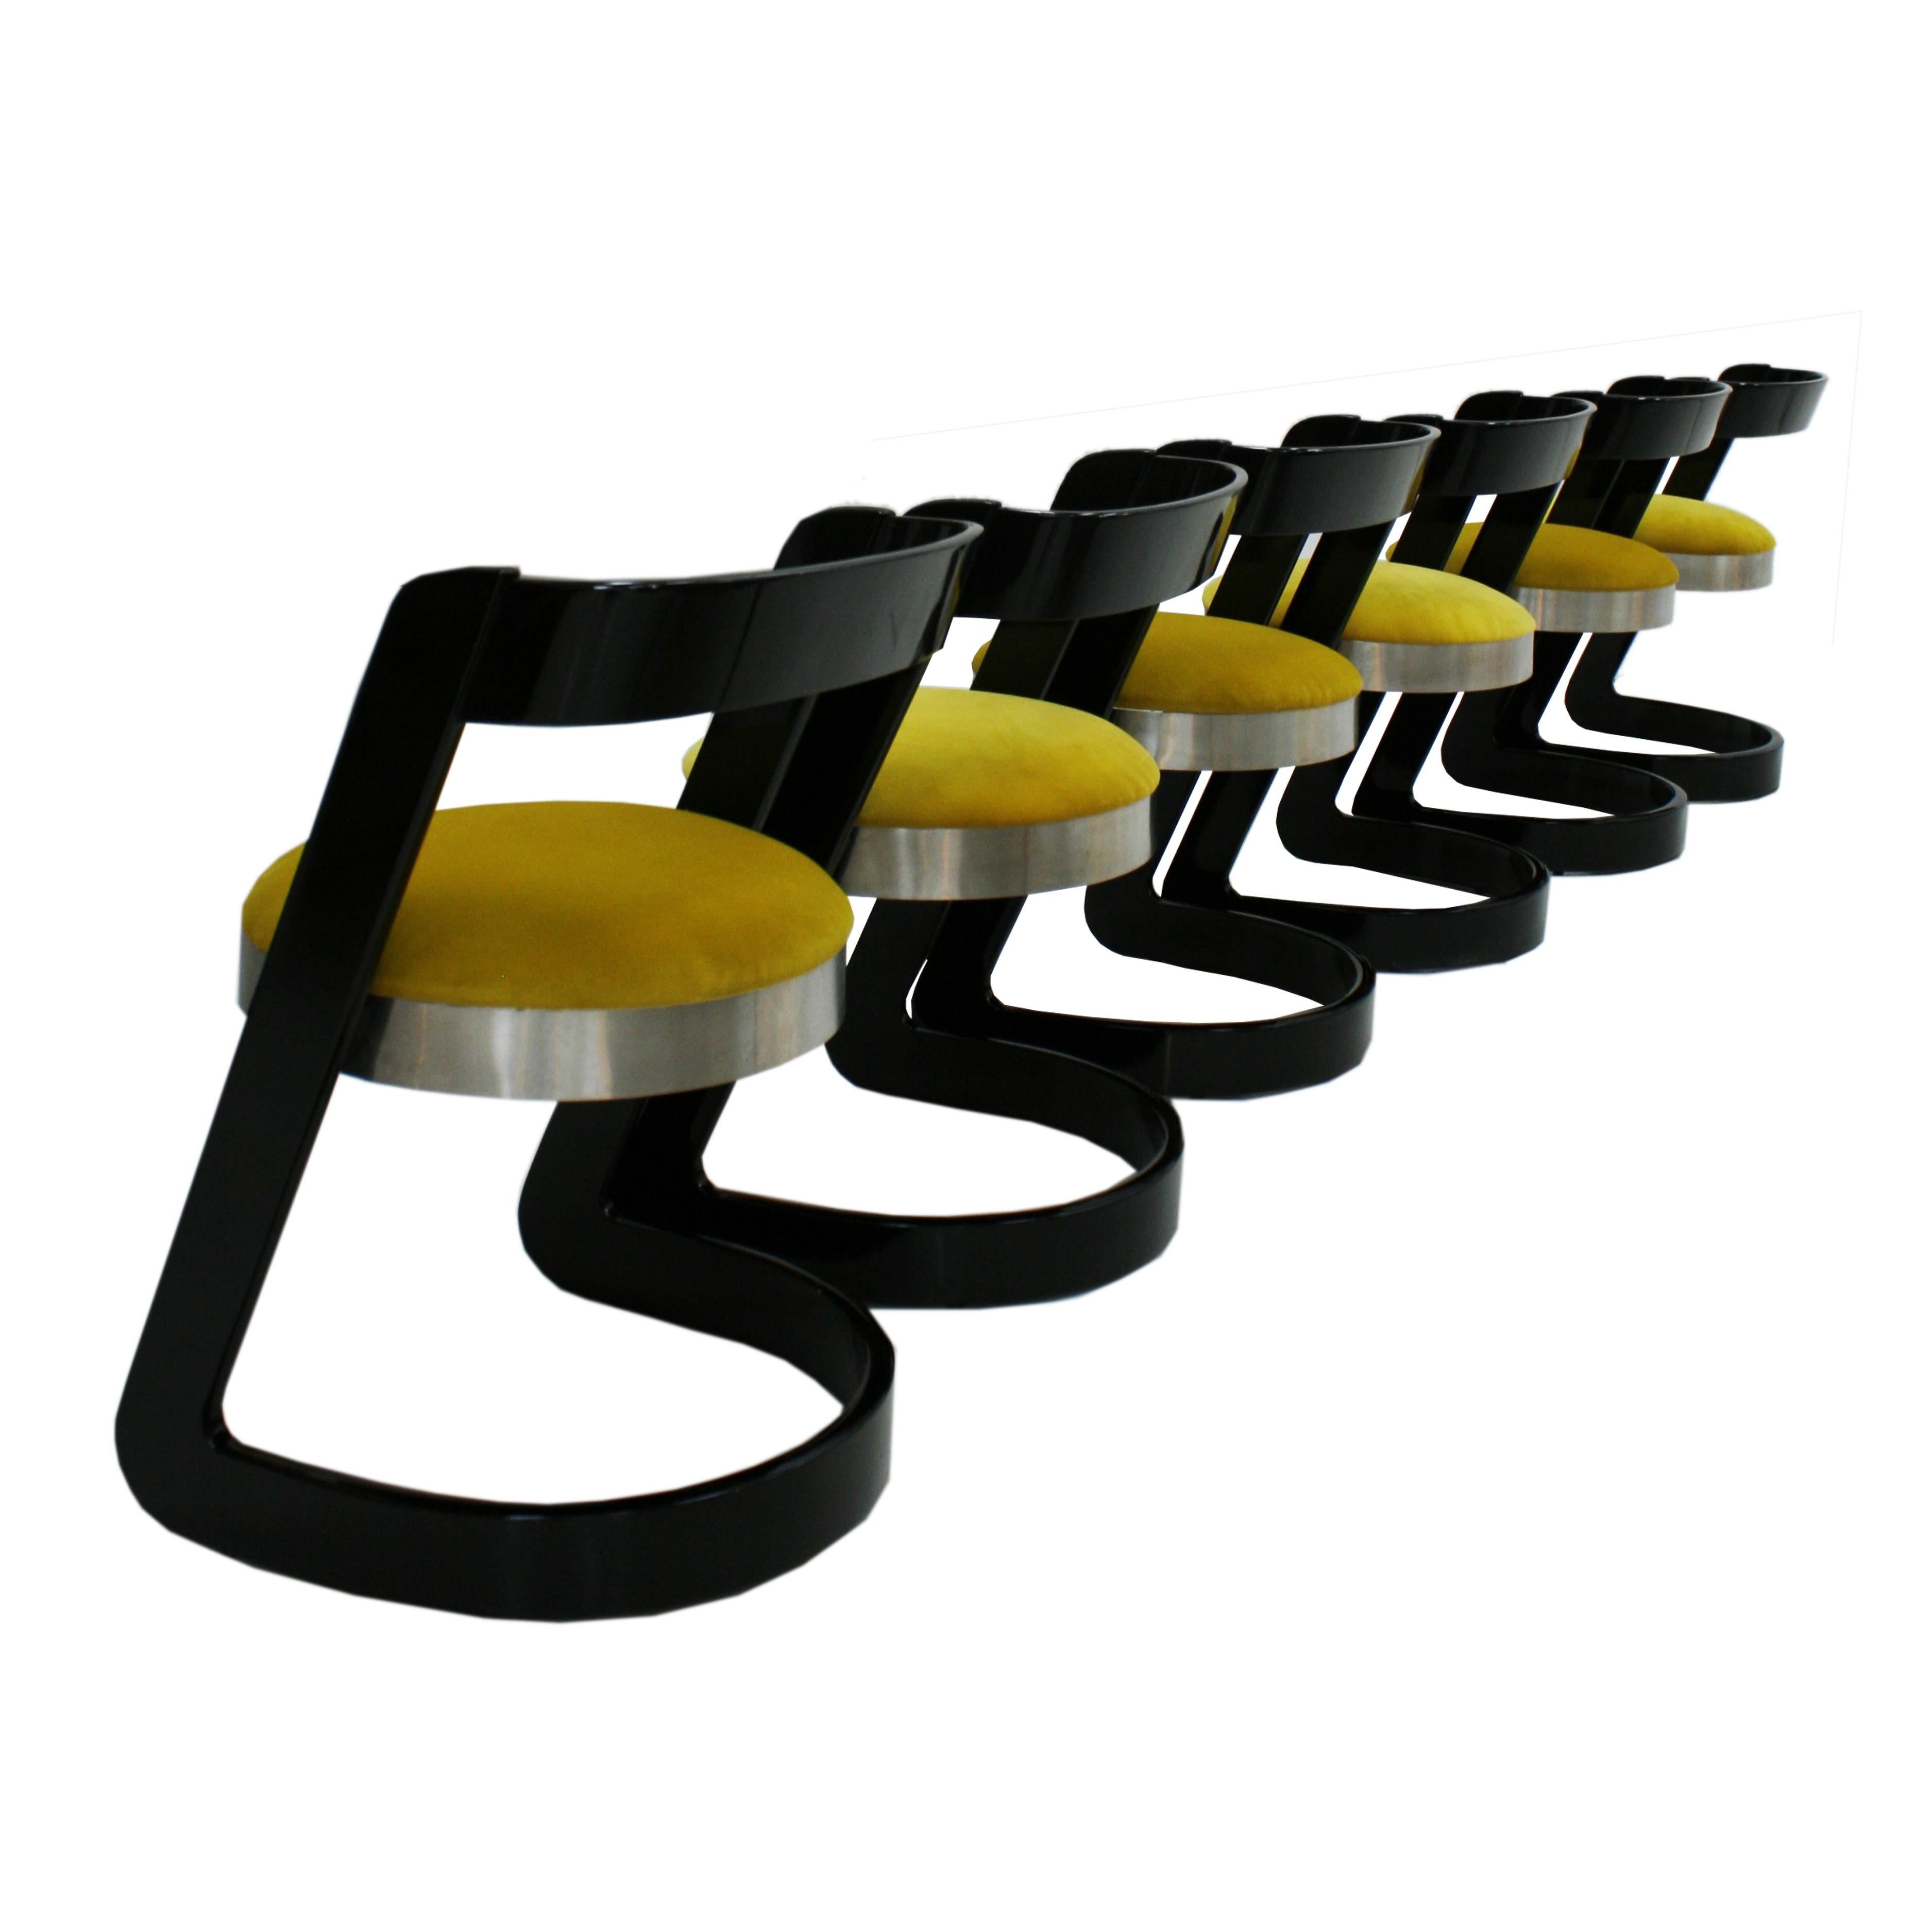 Set of six chairs designed by Willy Rizzo. Made of black lacquered wood structure. Seat reupholstered in yellow cotton velvet with polished steel frame, Italy, 1970s.

Our main target is customer satisfaction, so we include in the price for this